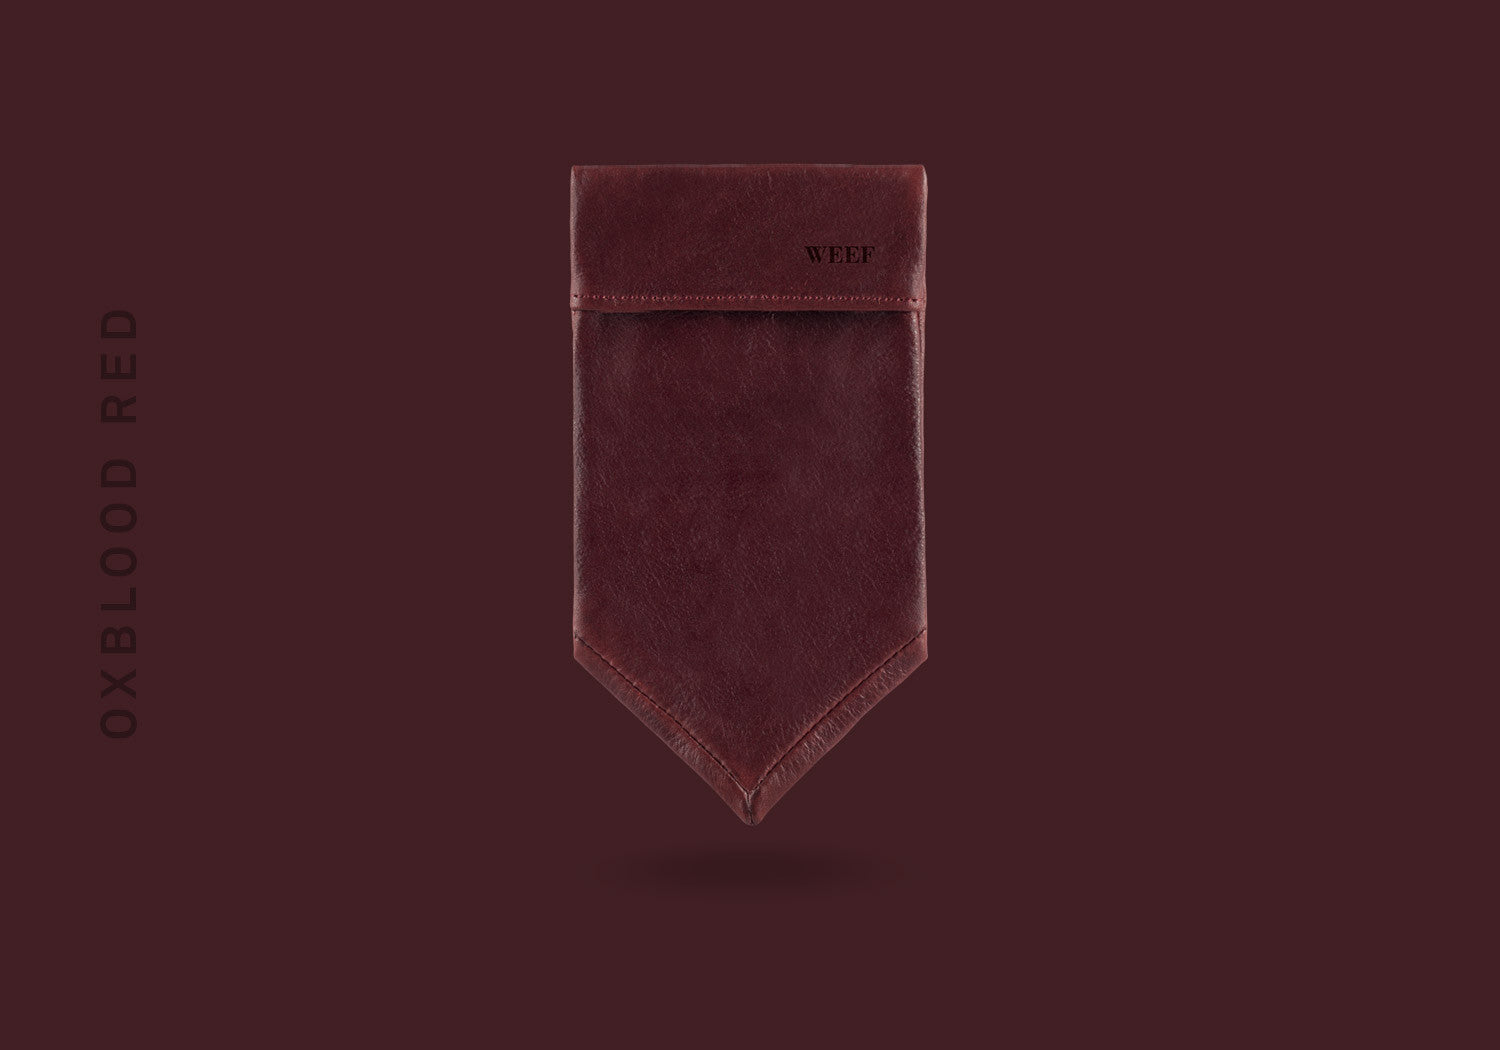 This oxblood red WEEF handmade leather pocket square is a great present or gift idea for dapper and stylish gentlemen for fathers day, valentines day or Christmas.